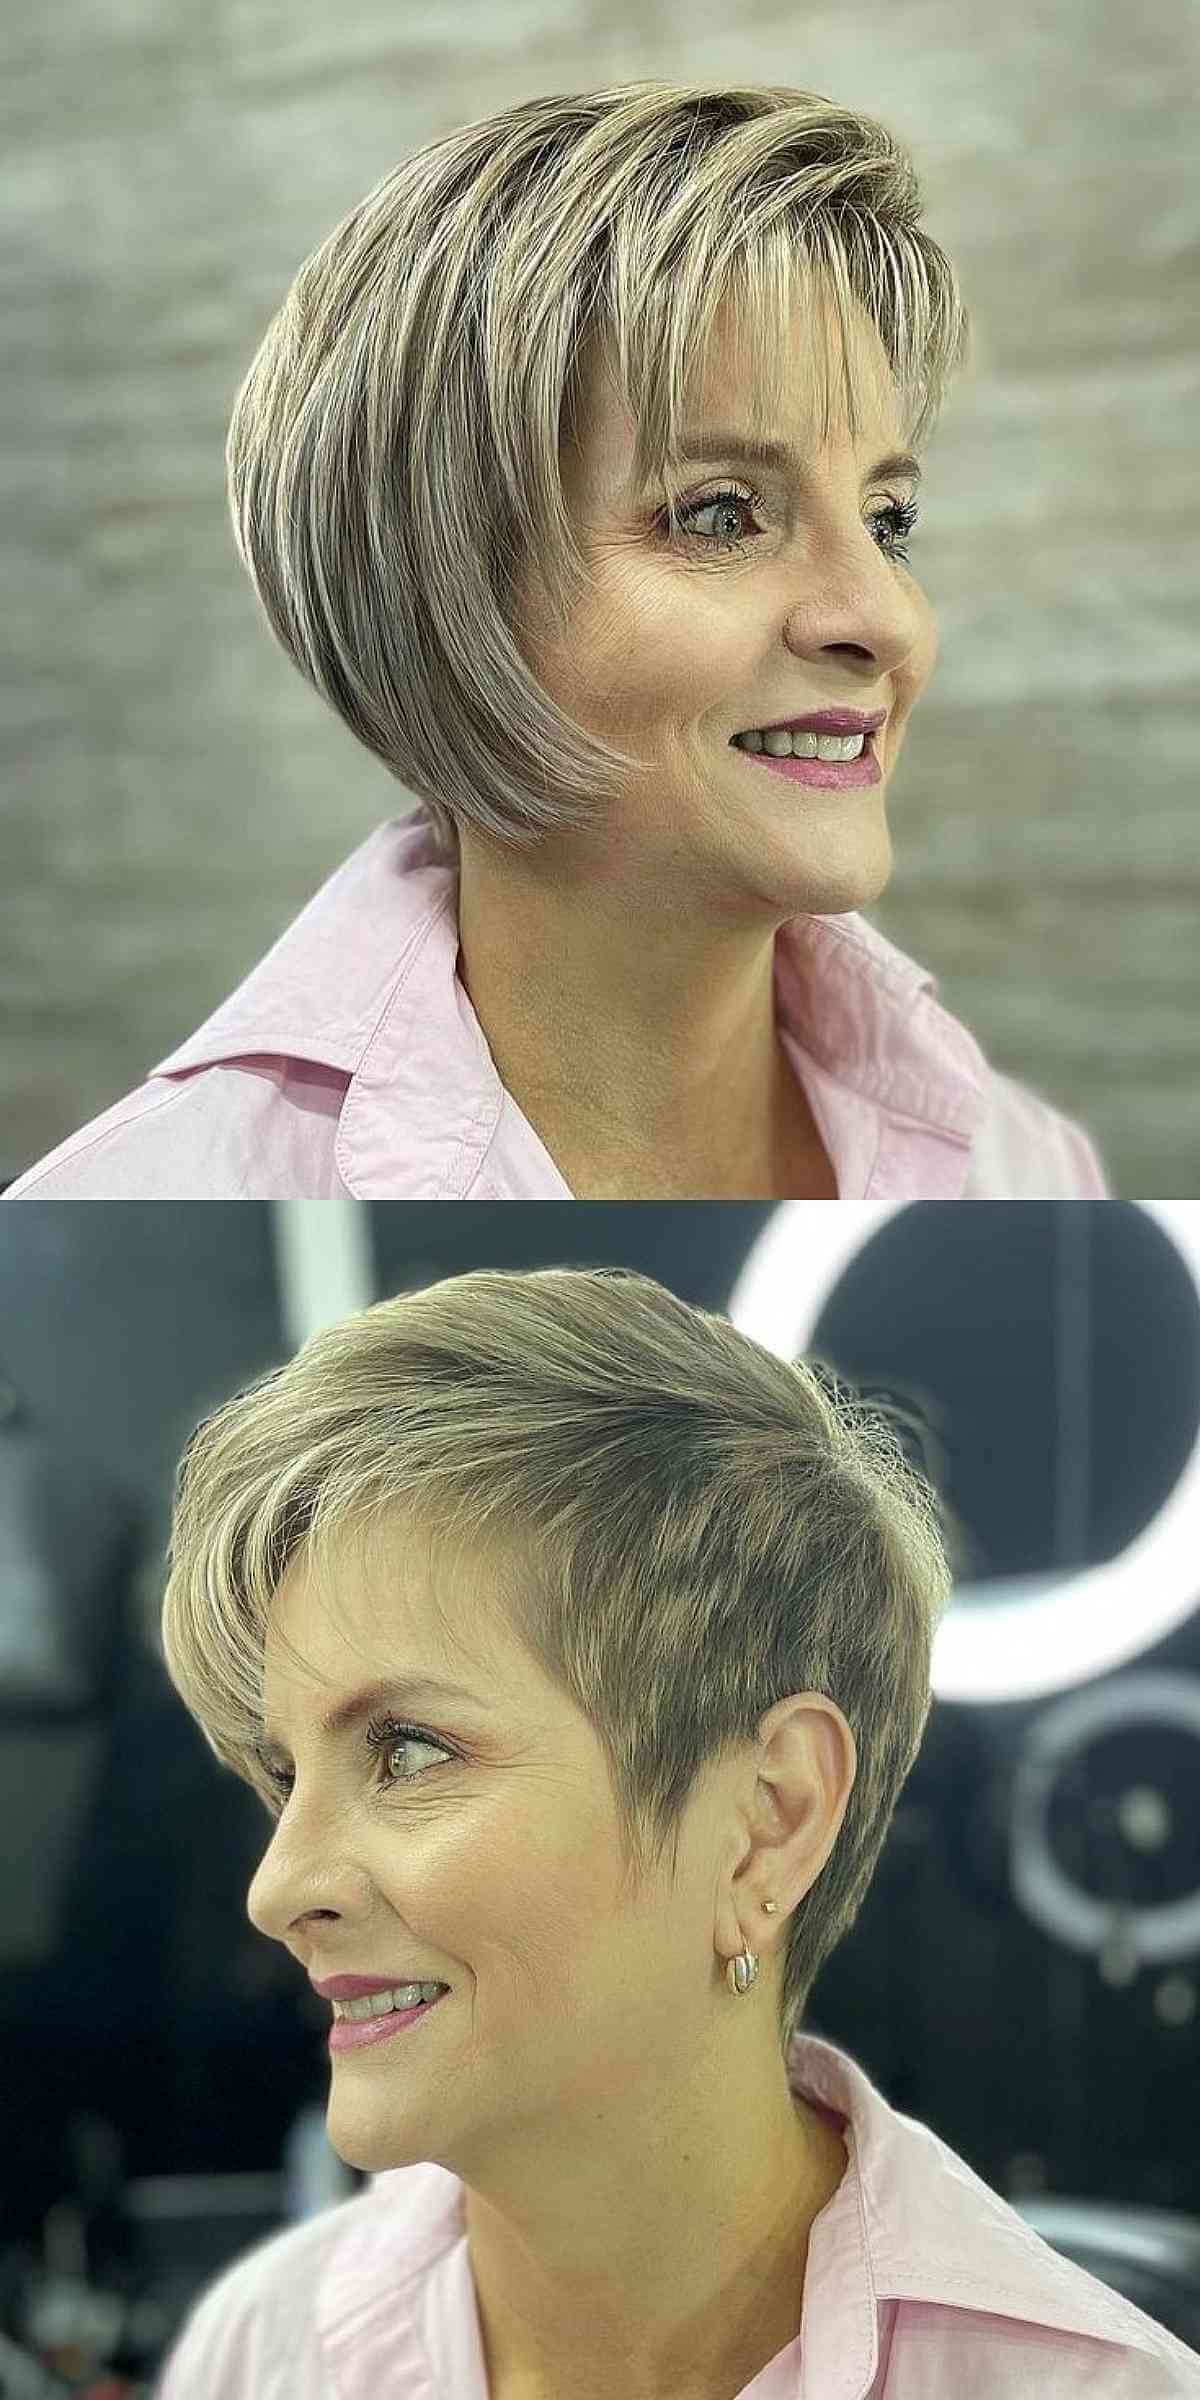 Jaw-Length Concave Bob with Wispy Bangs Cut Above the Shoulders